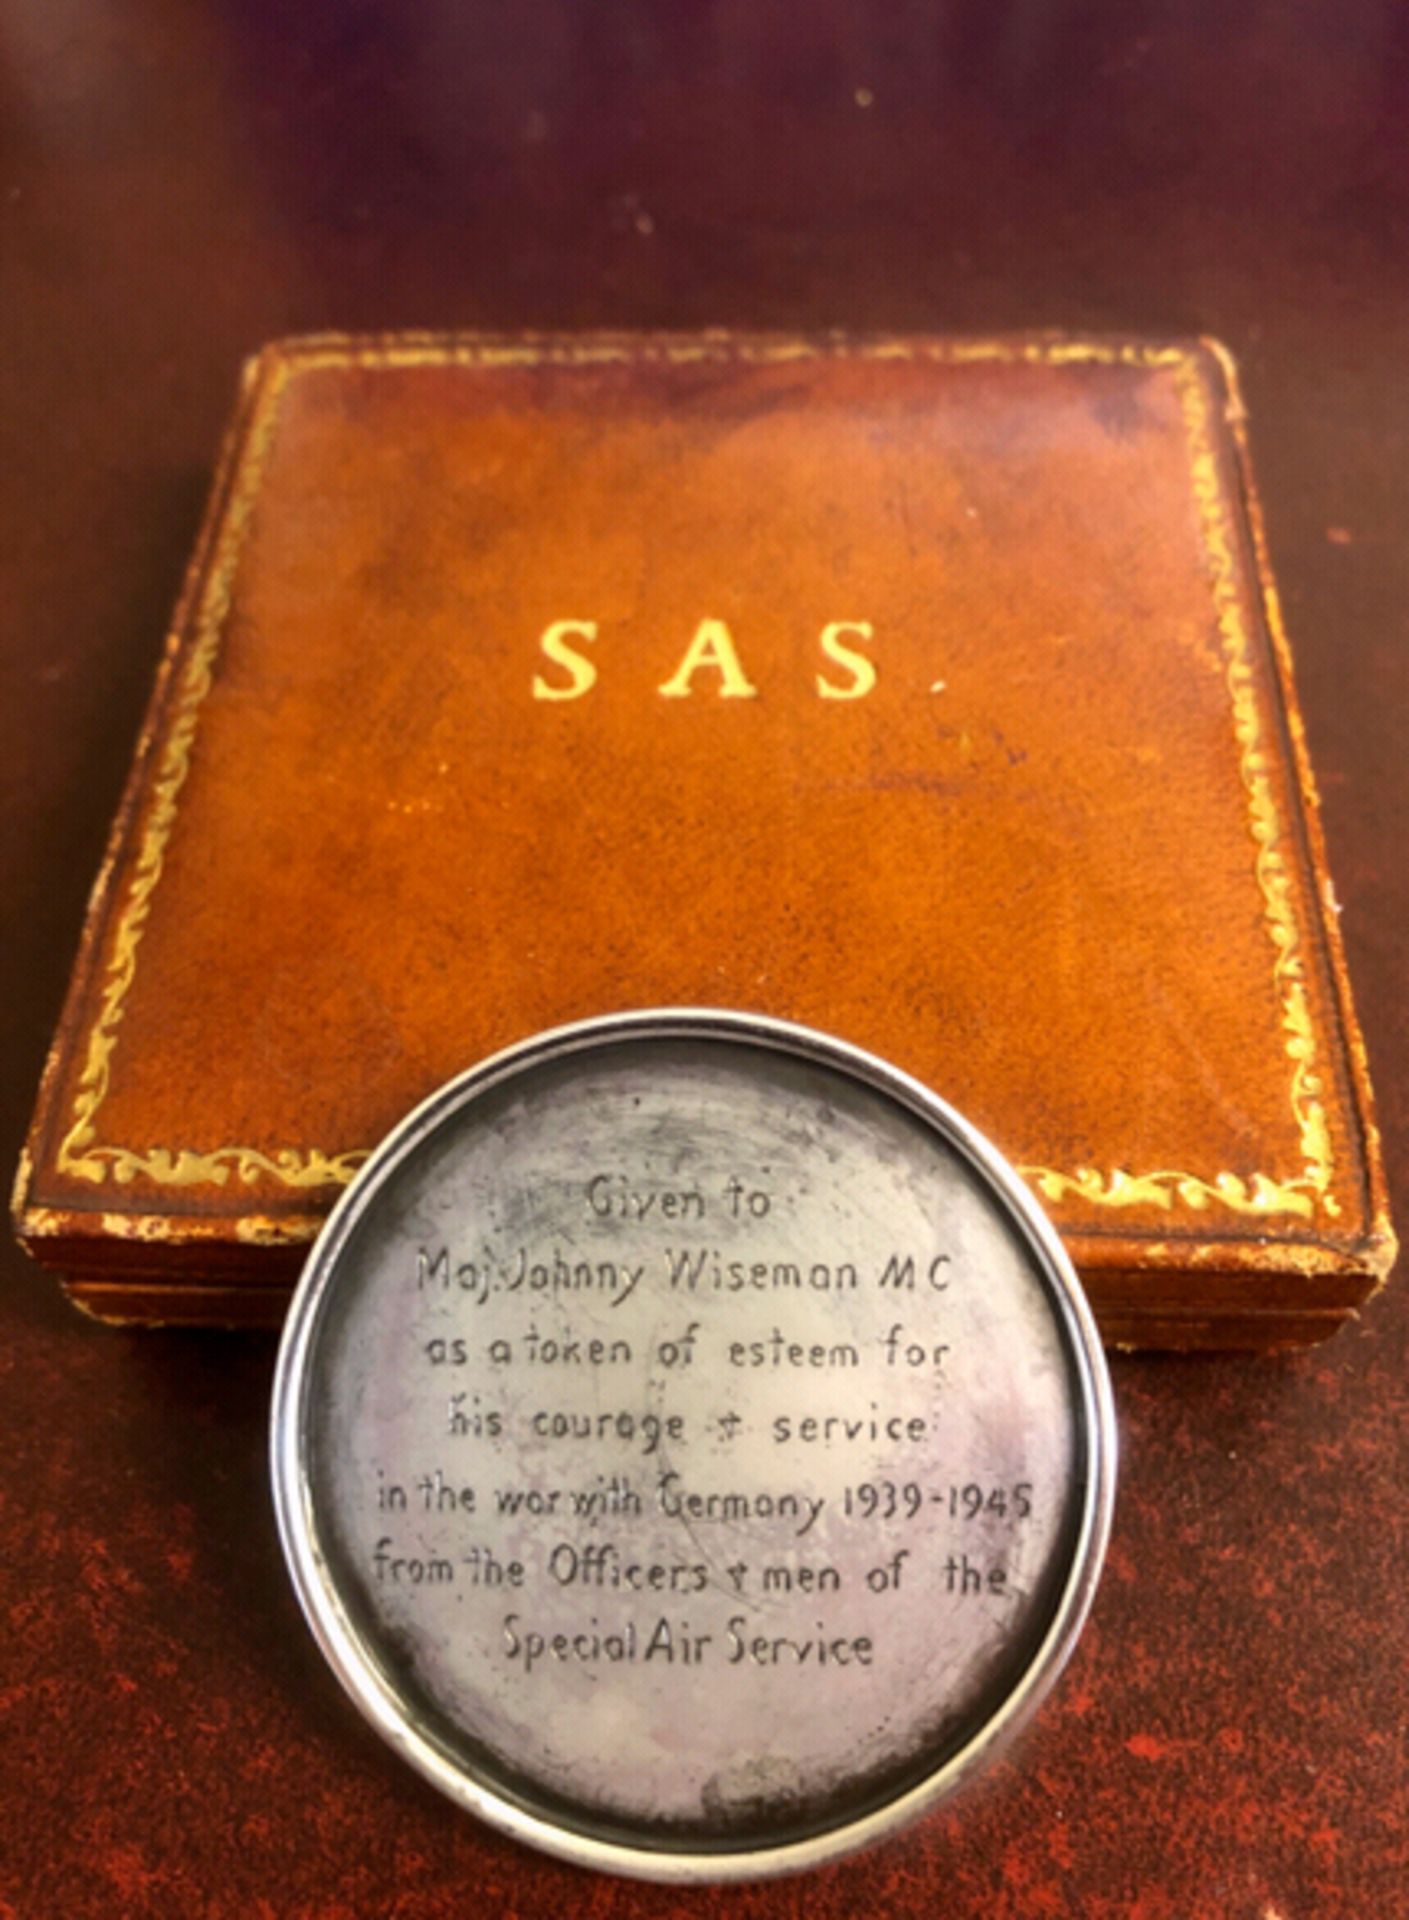 S.A.S. Interest. A circular medallion with the obverse cast SAS regimental badge with motto Who Dare